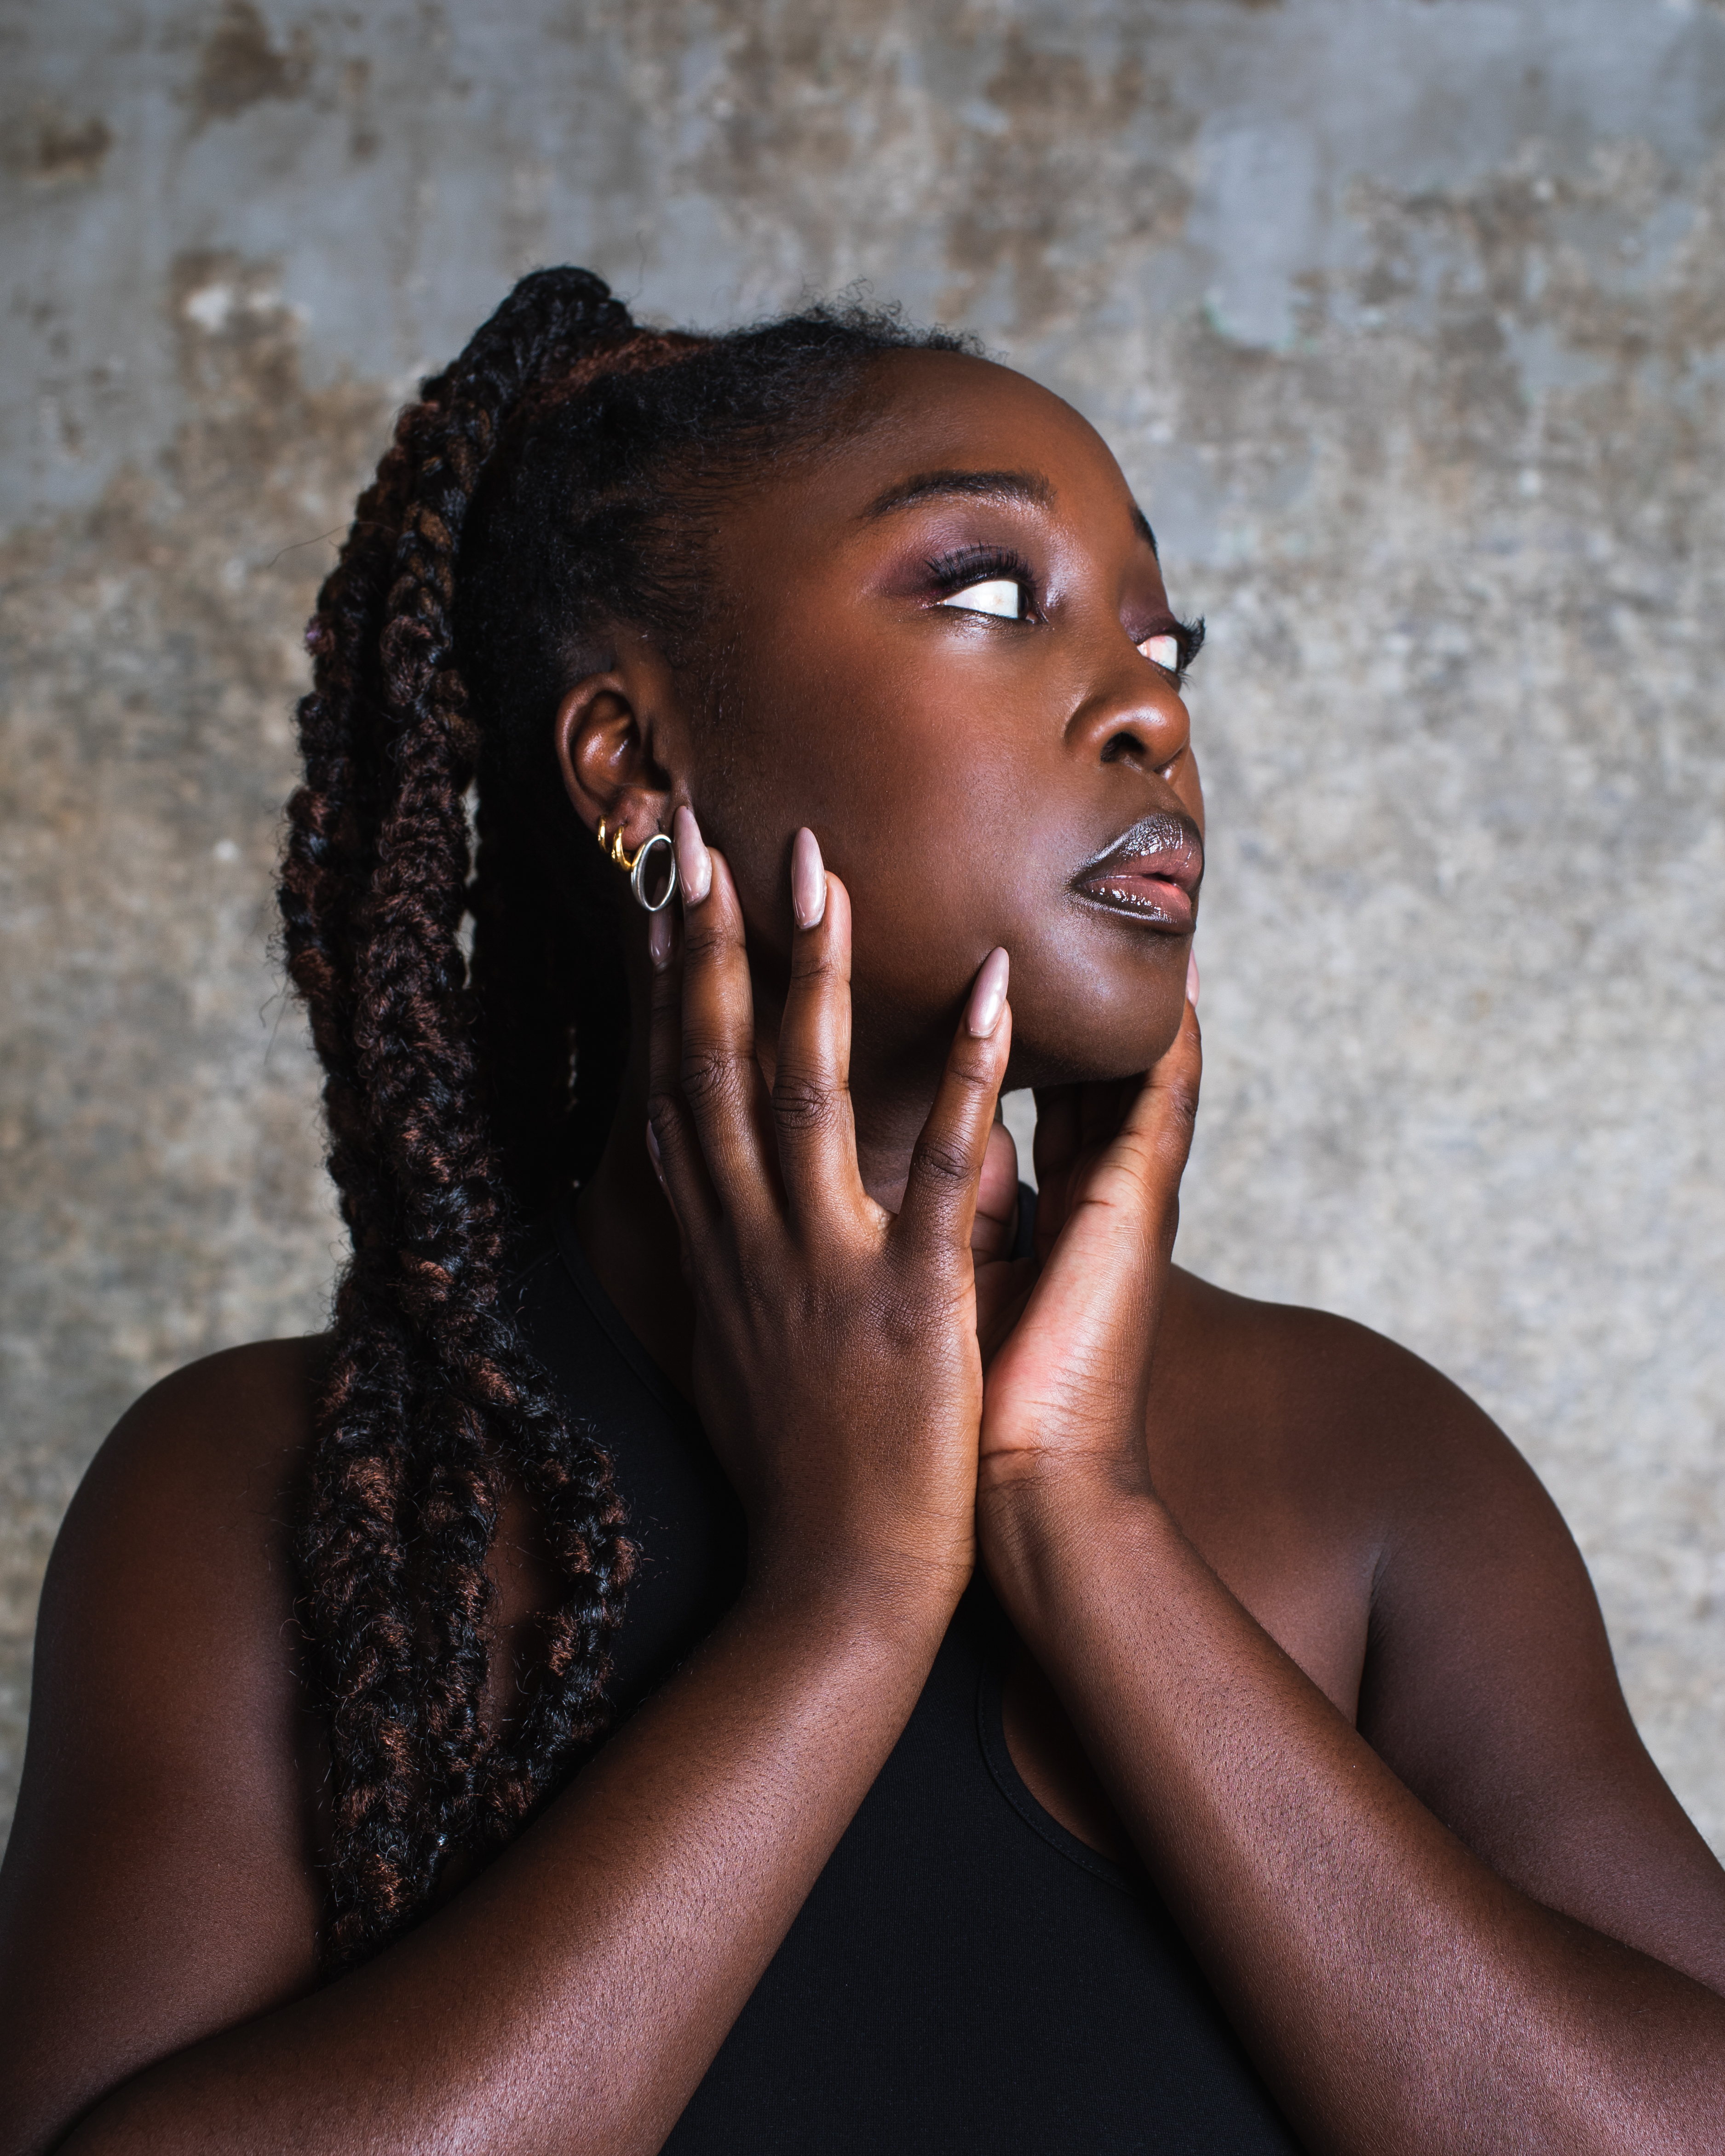 Dani Howard, Cassie Kinoshi and Matthew Herbert among six talented composers to receive PRS Foundation’s Composers’ Fund